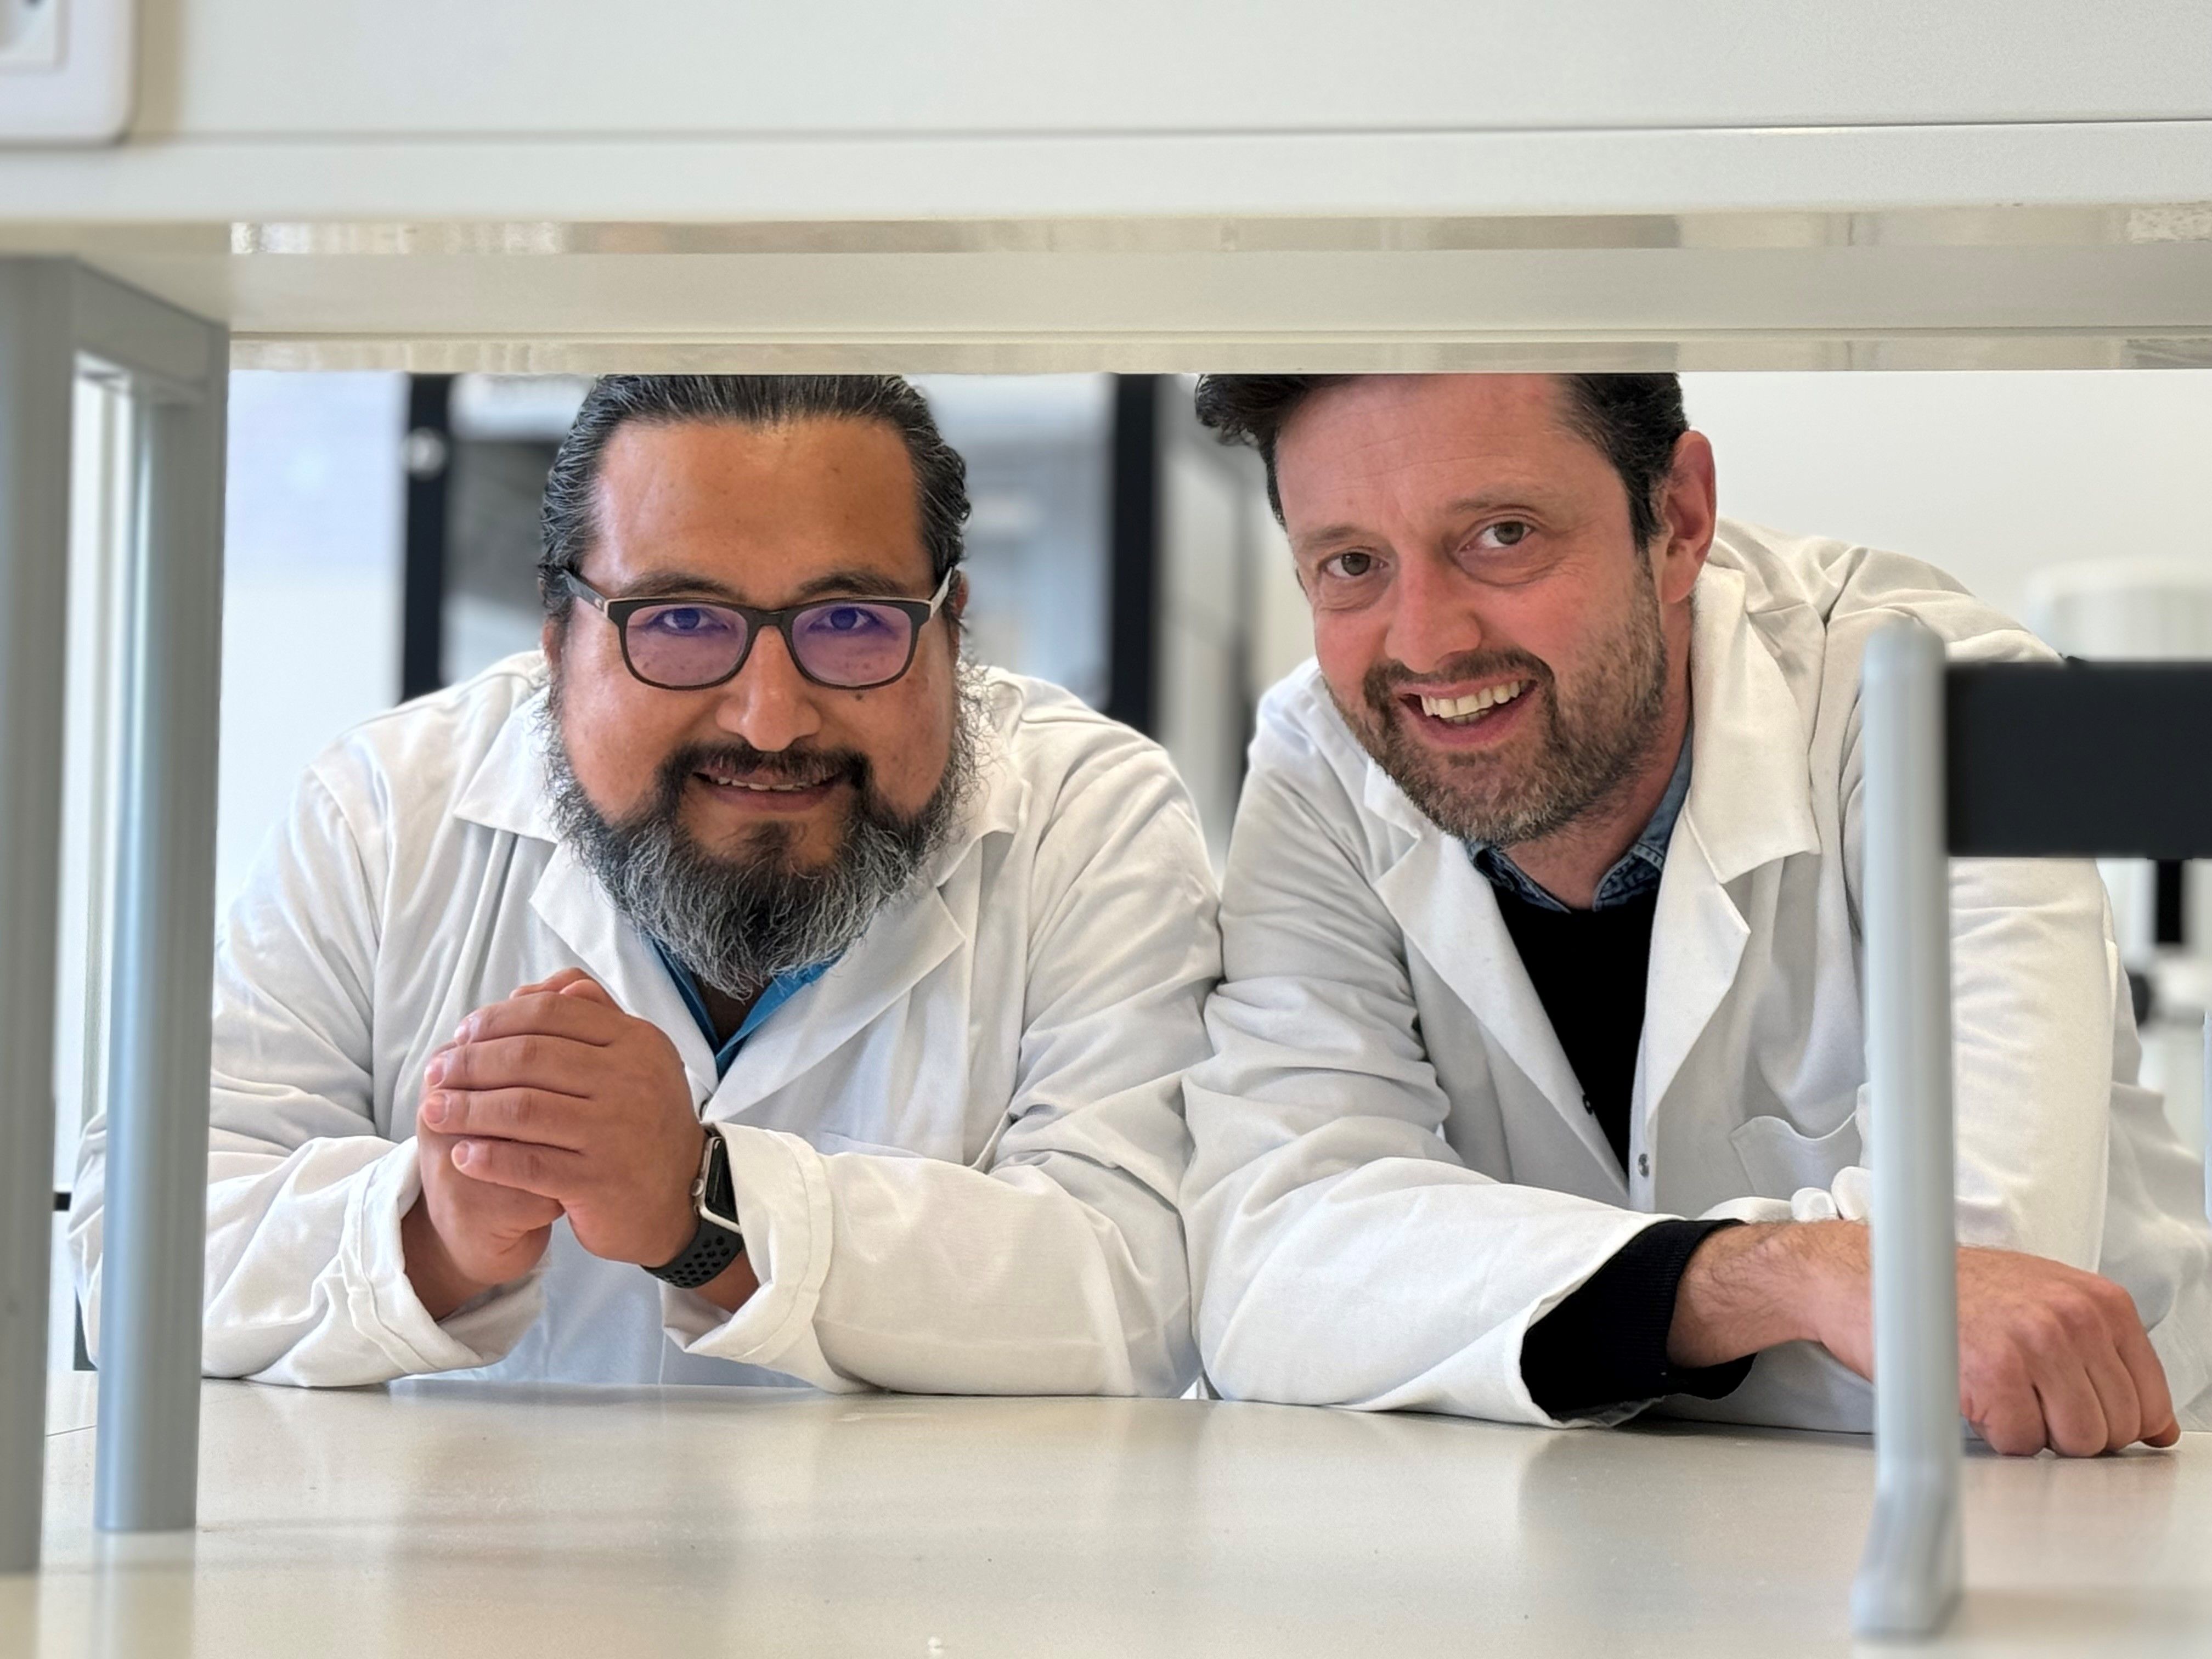 Dr. Raul Yhossef Tito-Tadeo, first author and postdoc at the Raes Lab (left) and Professor Dr. Jeroen Raes, PI and Vice-Director at VIB-KU Leuven Center for Microbiology and Rega Institute, Faculty of Medicine, KU Leuven. (Right)